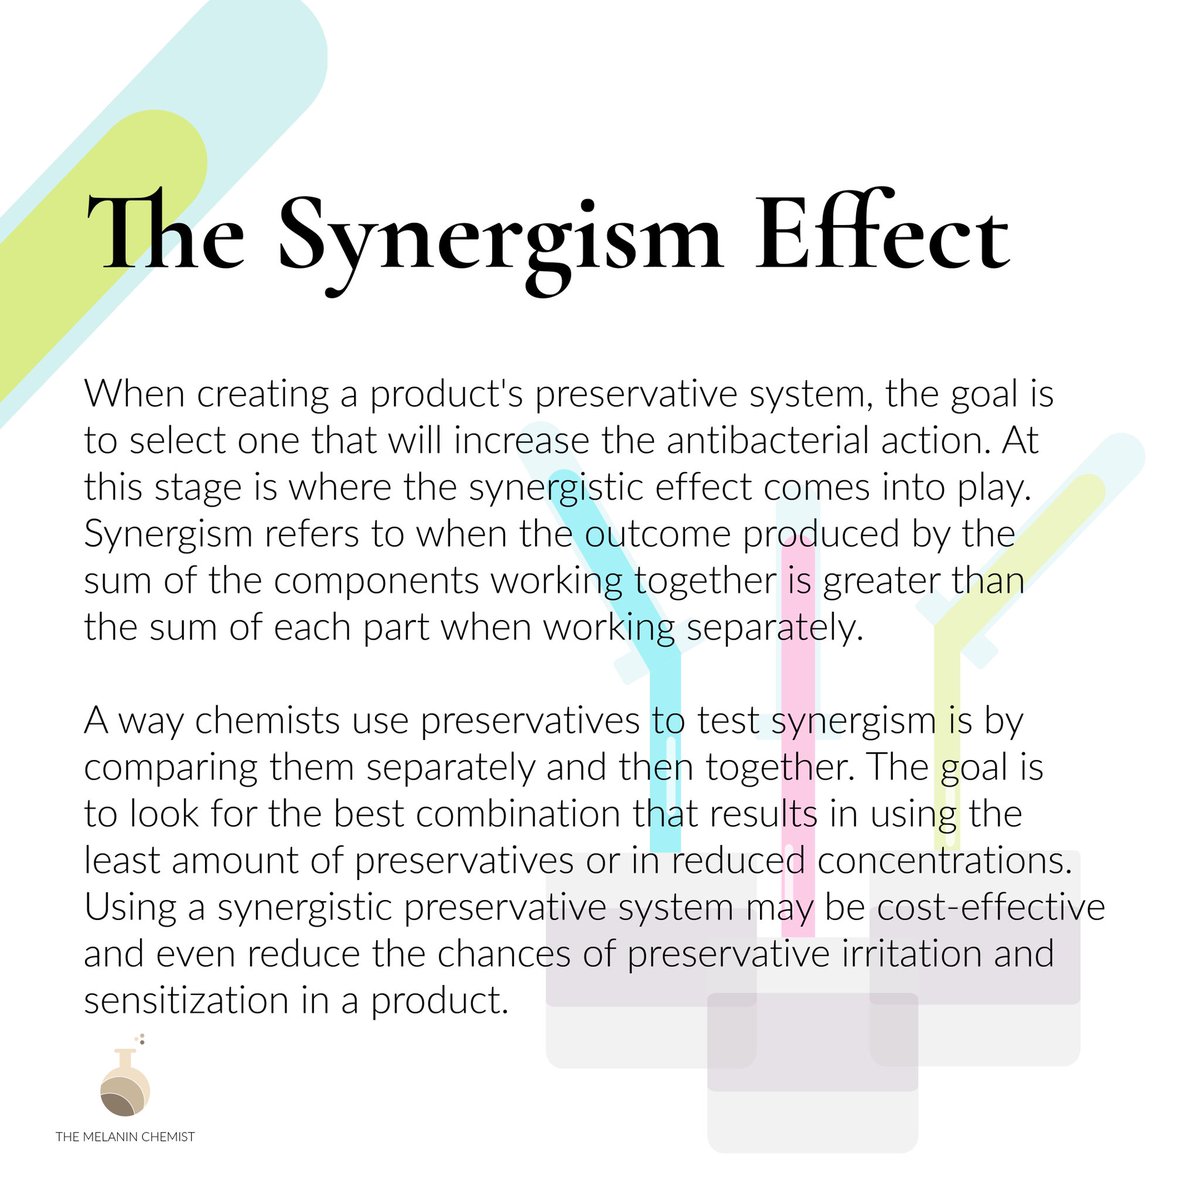 Another thing to take note of: the synergistic effect! The synergistic effect is an effect produced by the combination of ingredients where it is GREATER than the sum of effects of each component taken separately. Let me give you an example: